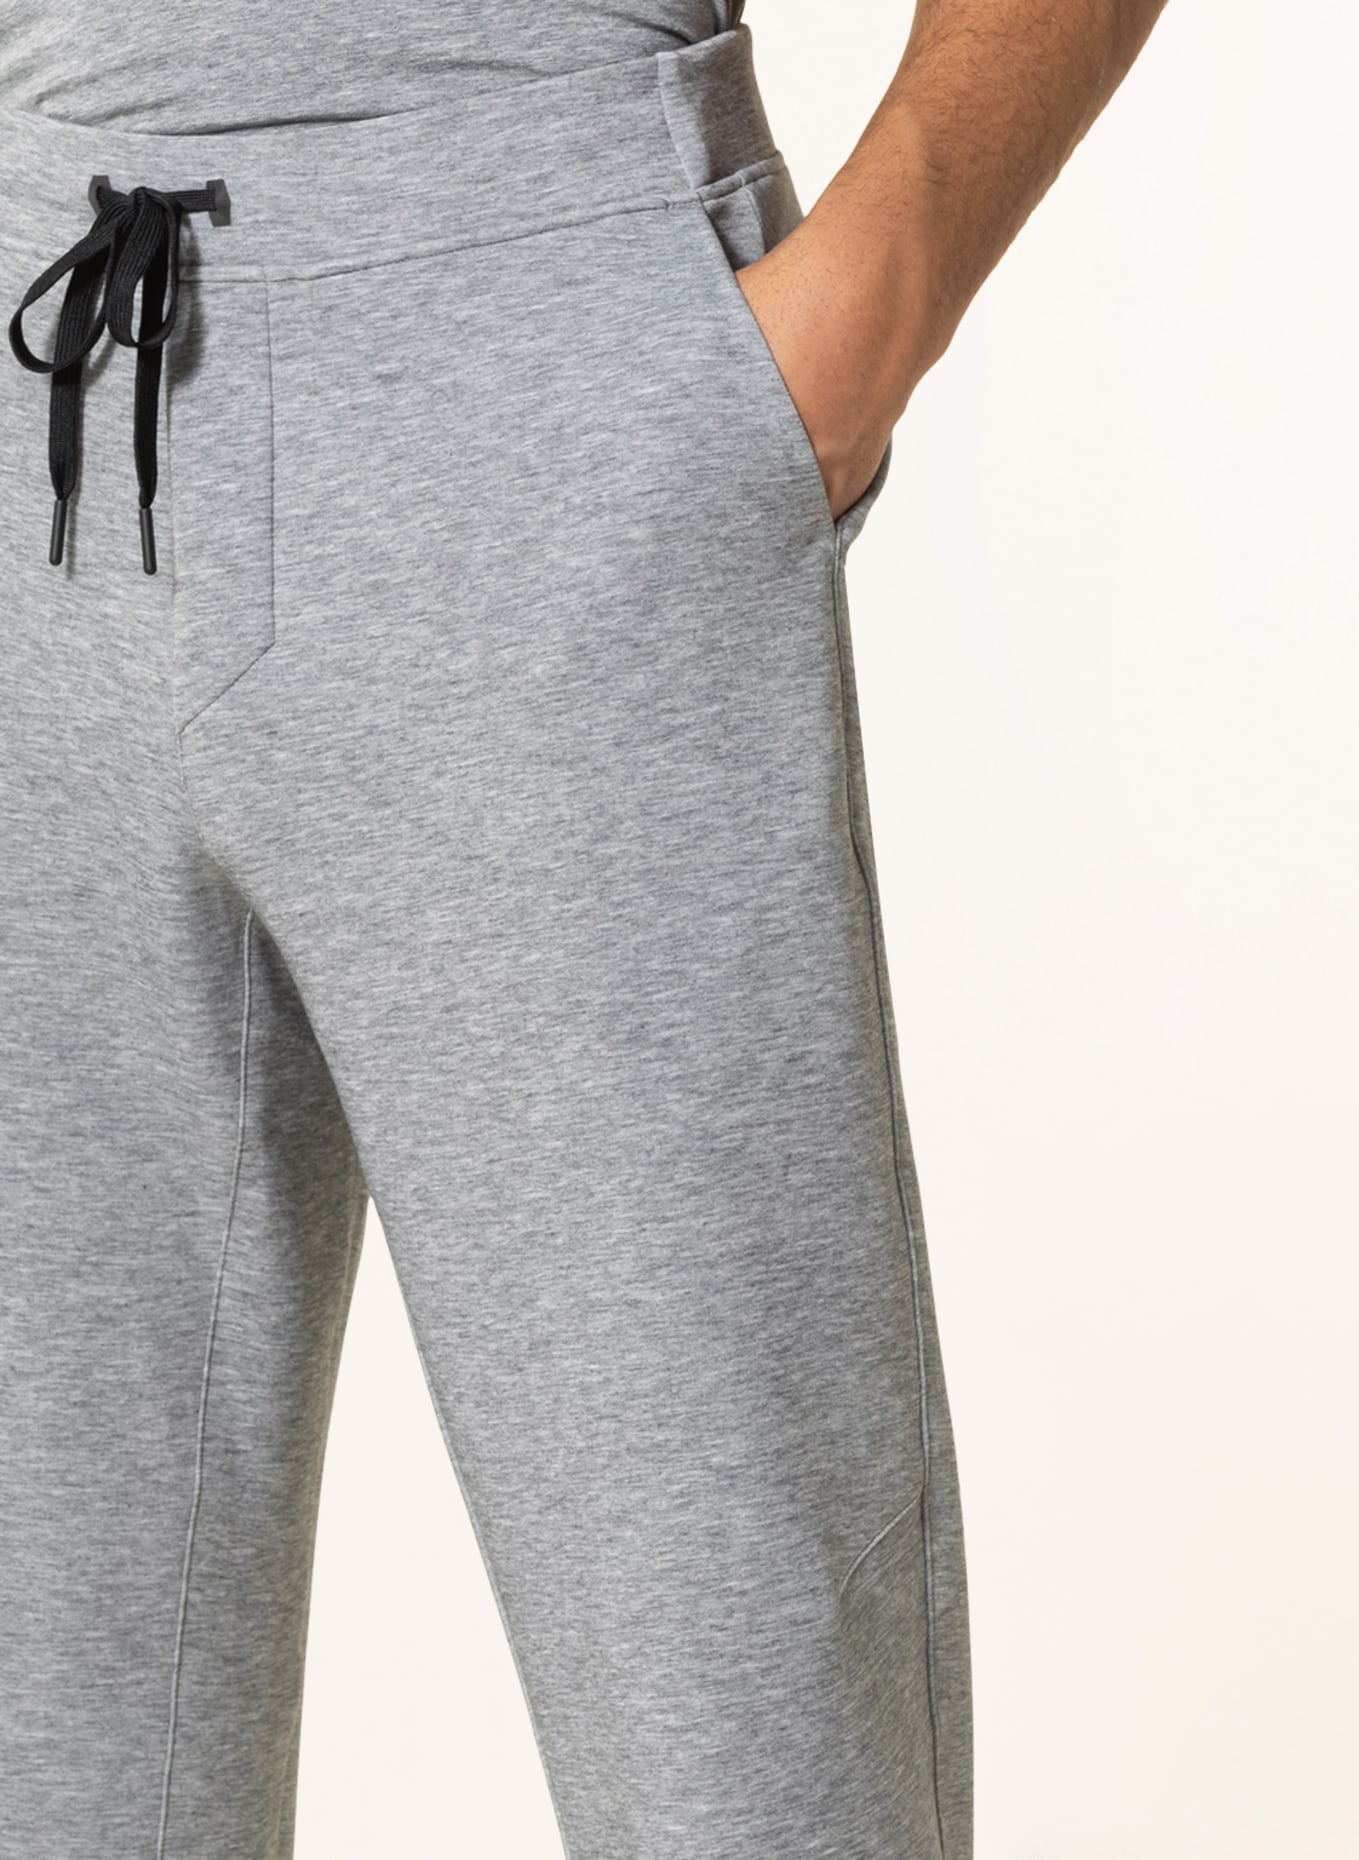 On Sweatpants in gray